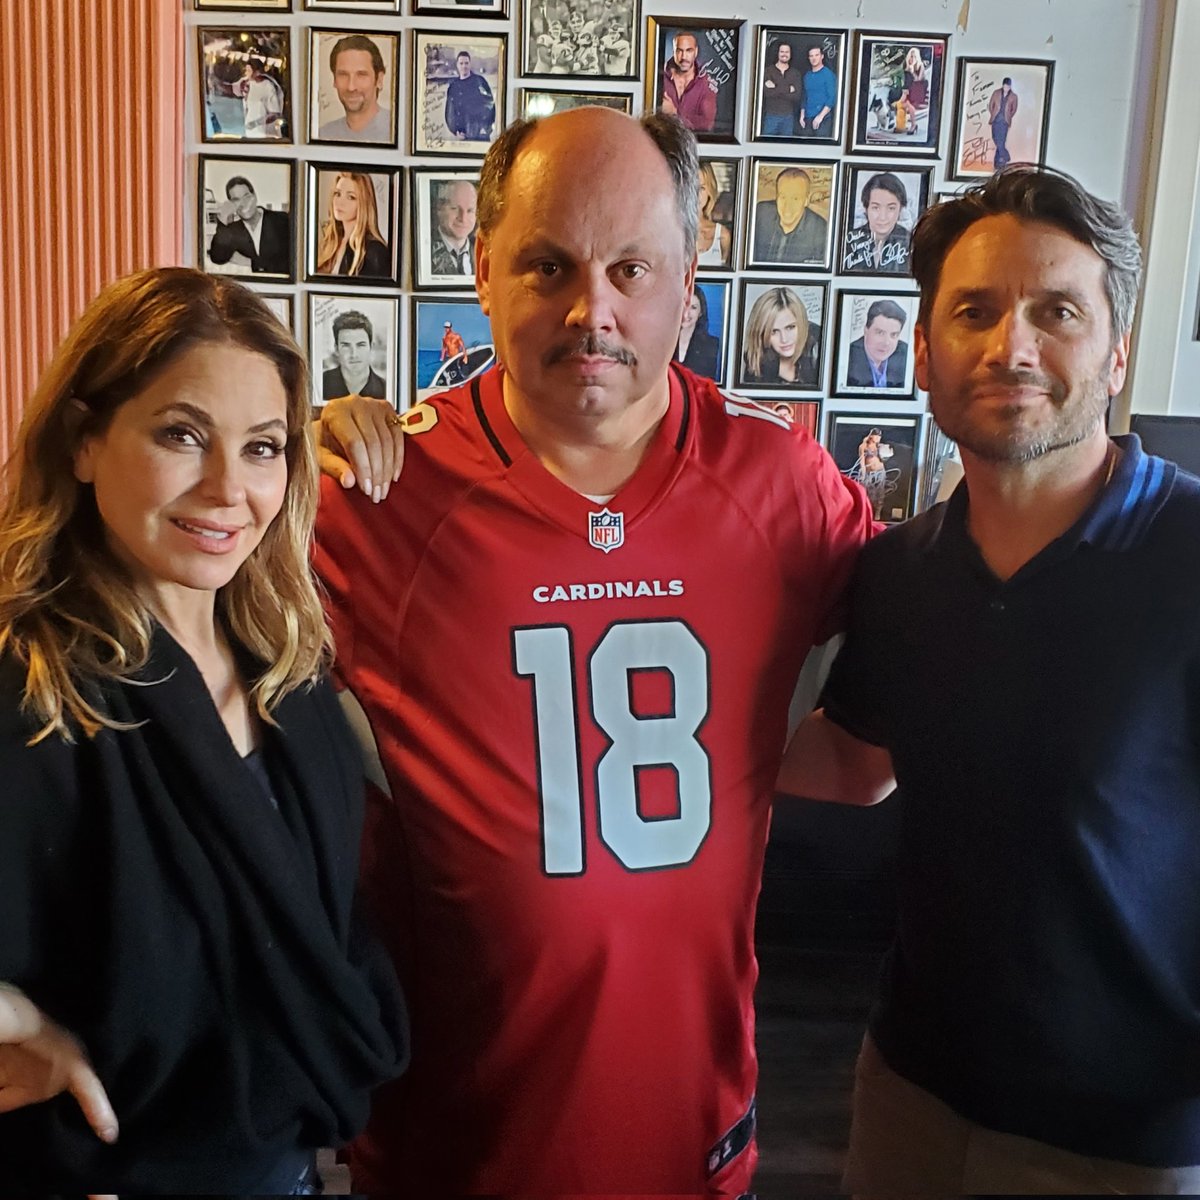 It was great seeing you and Dominic Zamprogna @lisalocicerogh @UNCLEVINNIESCC @SoapBossDino if you want to have a great time meeting your soap stars come here